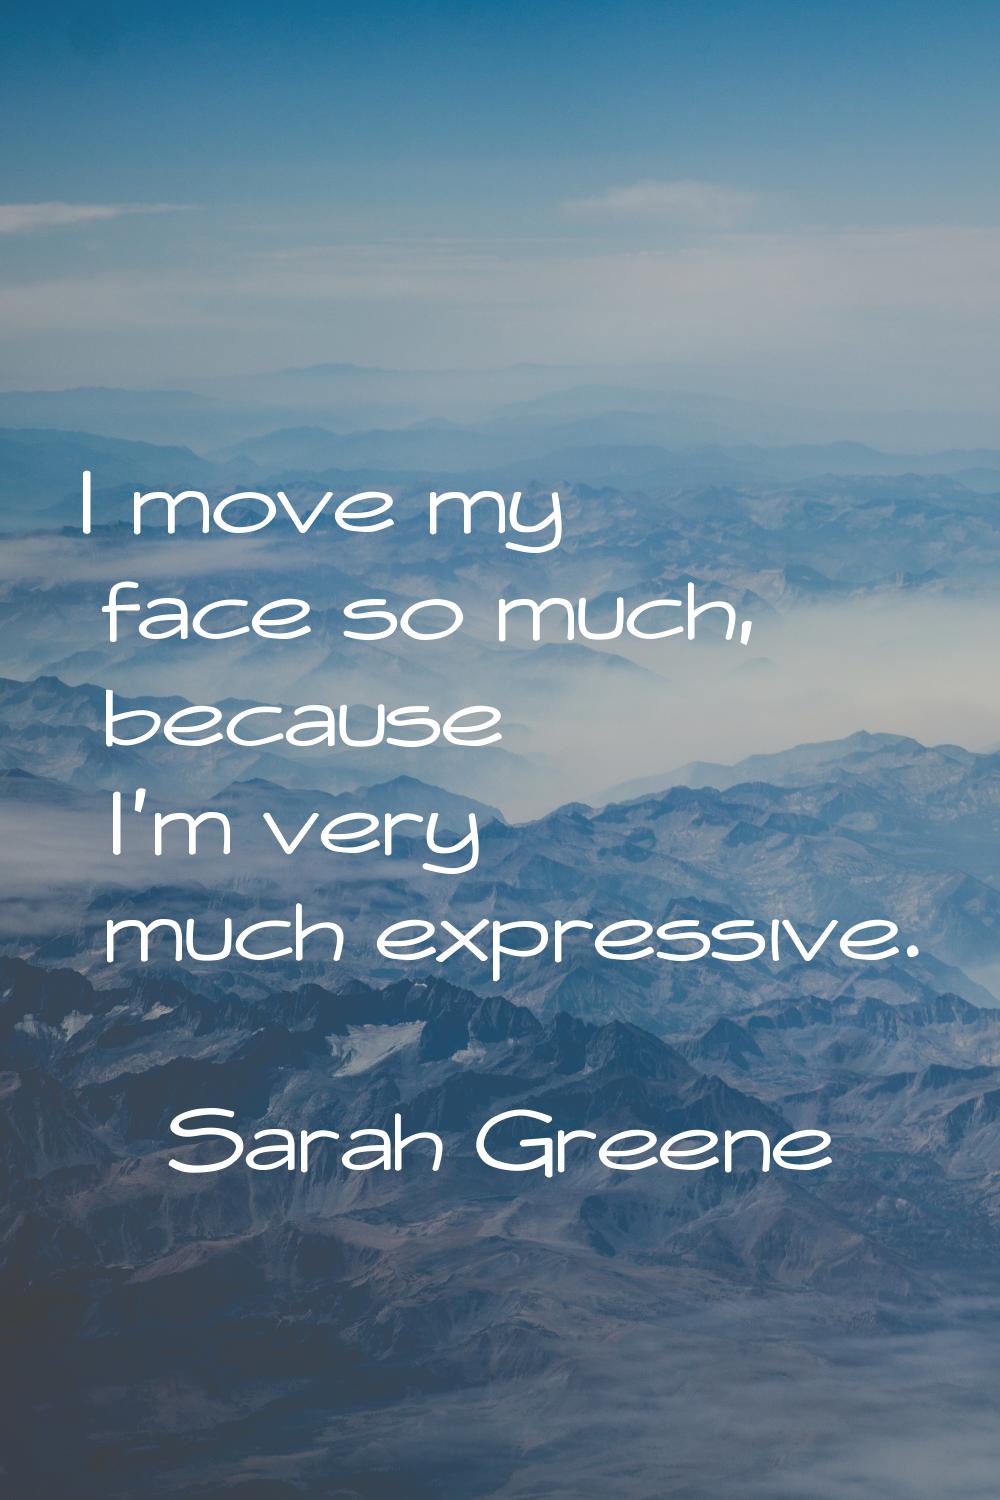 I move my face so much, because I'm very much expressive.